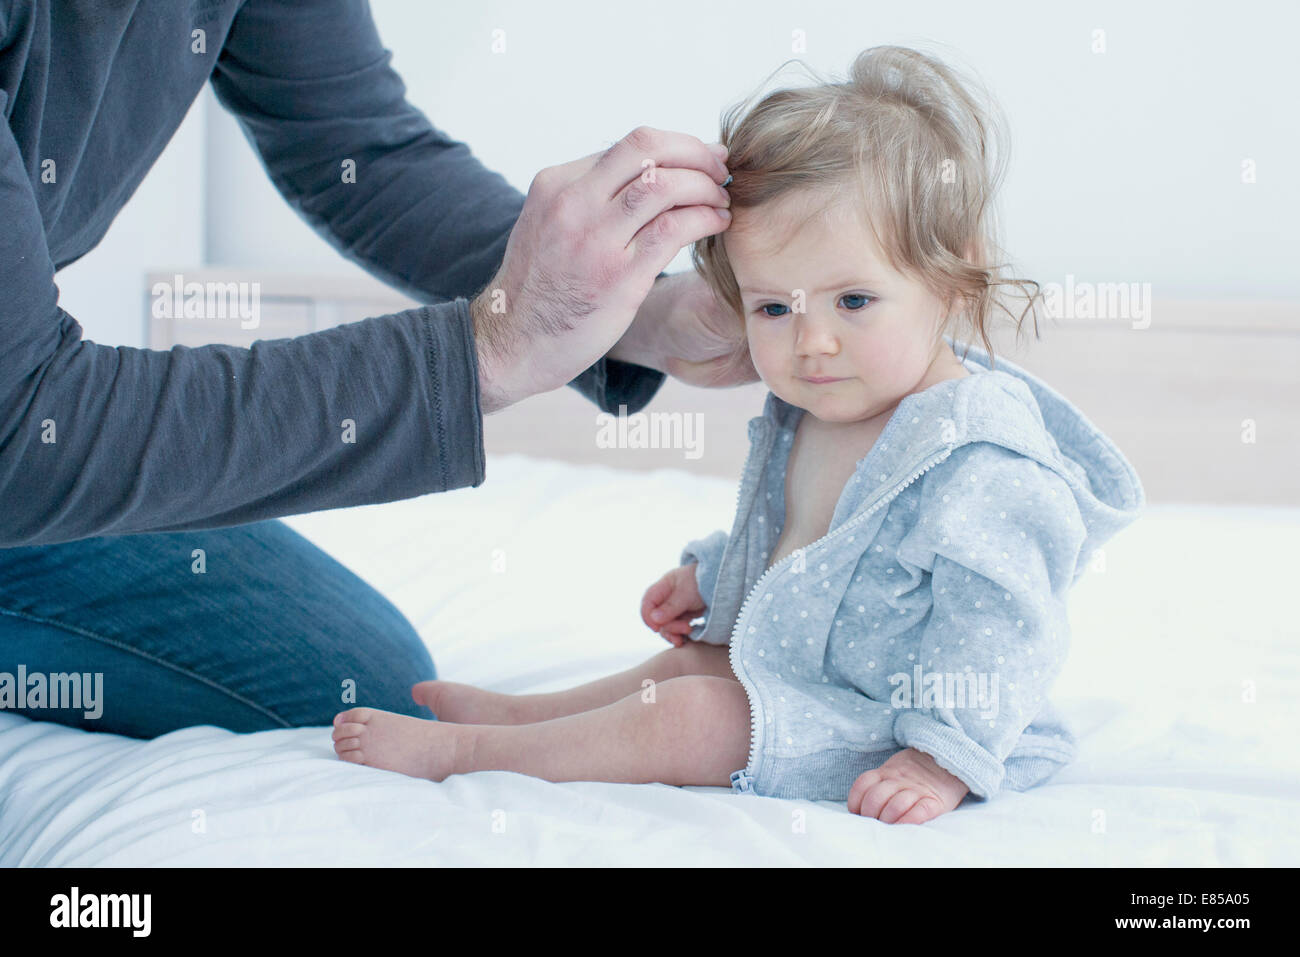 Father fixing baby girl's hair, cropped Stock Photo